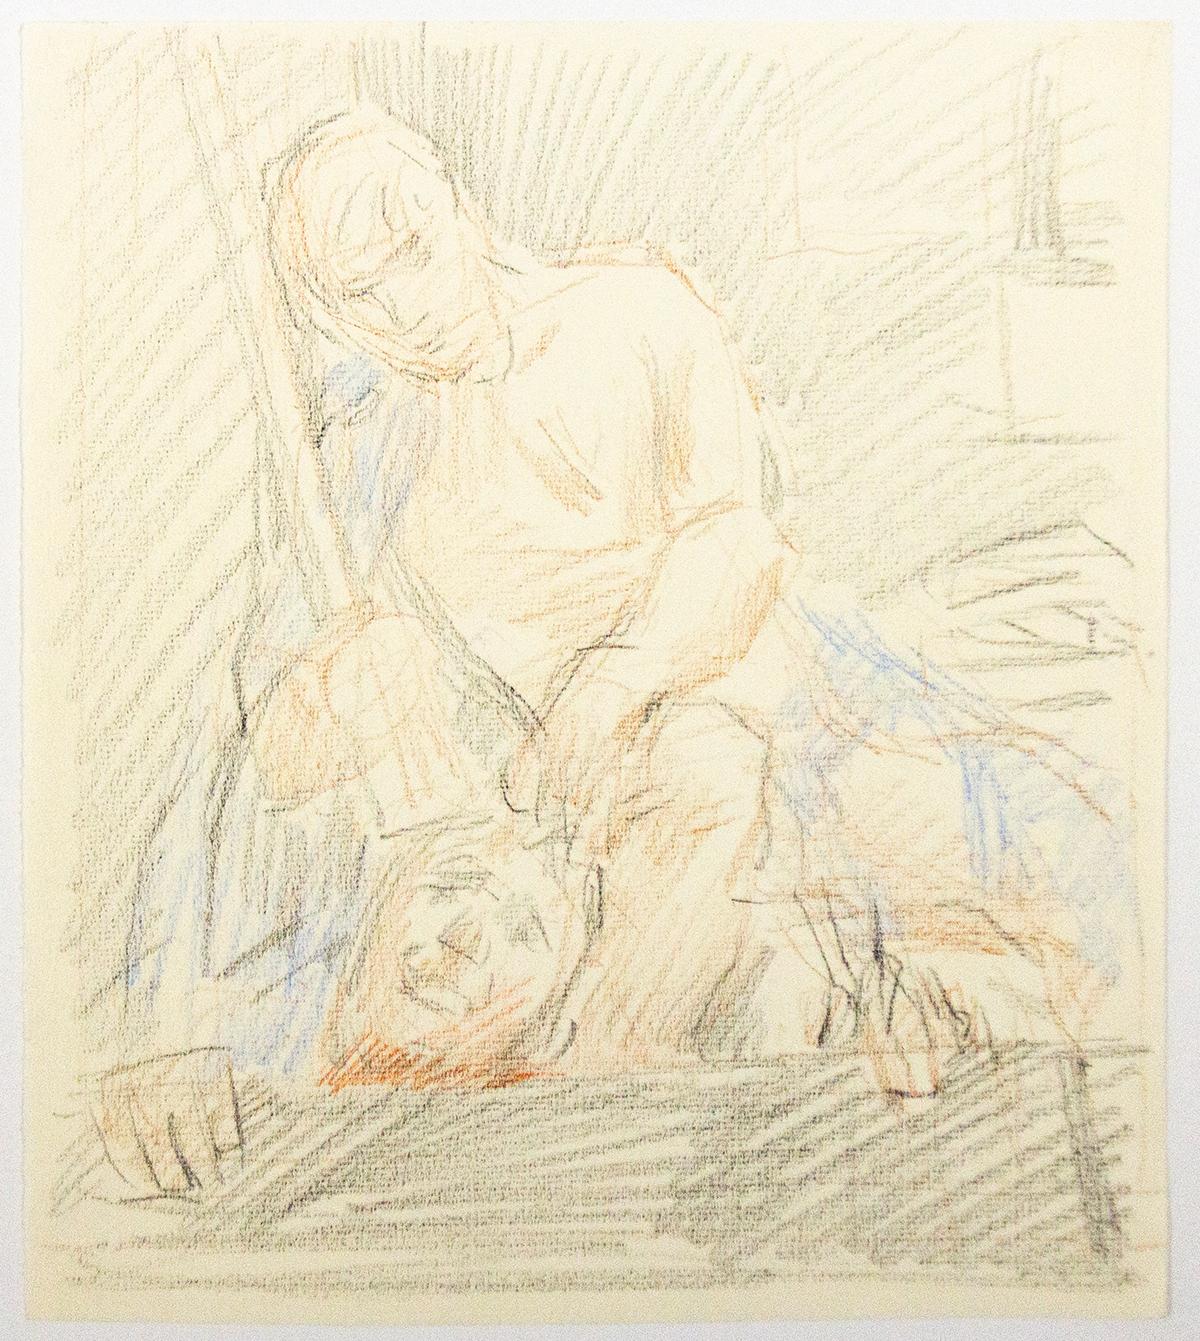 Study for "David and Goliath" - Art by Paul Cadmus